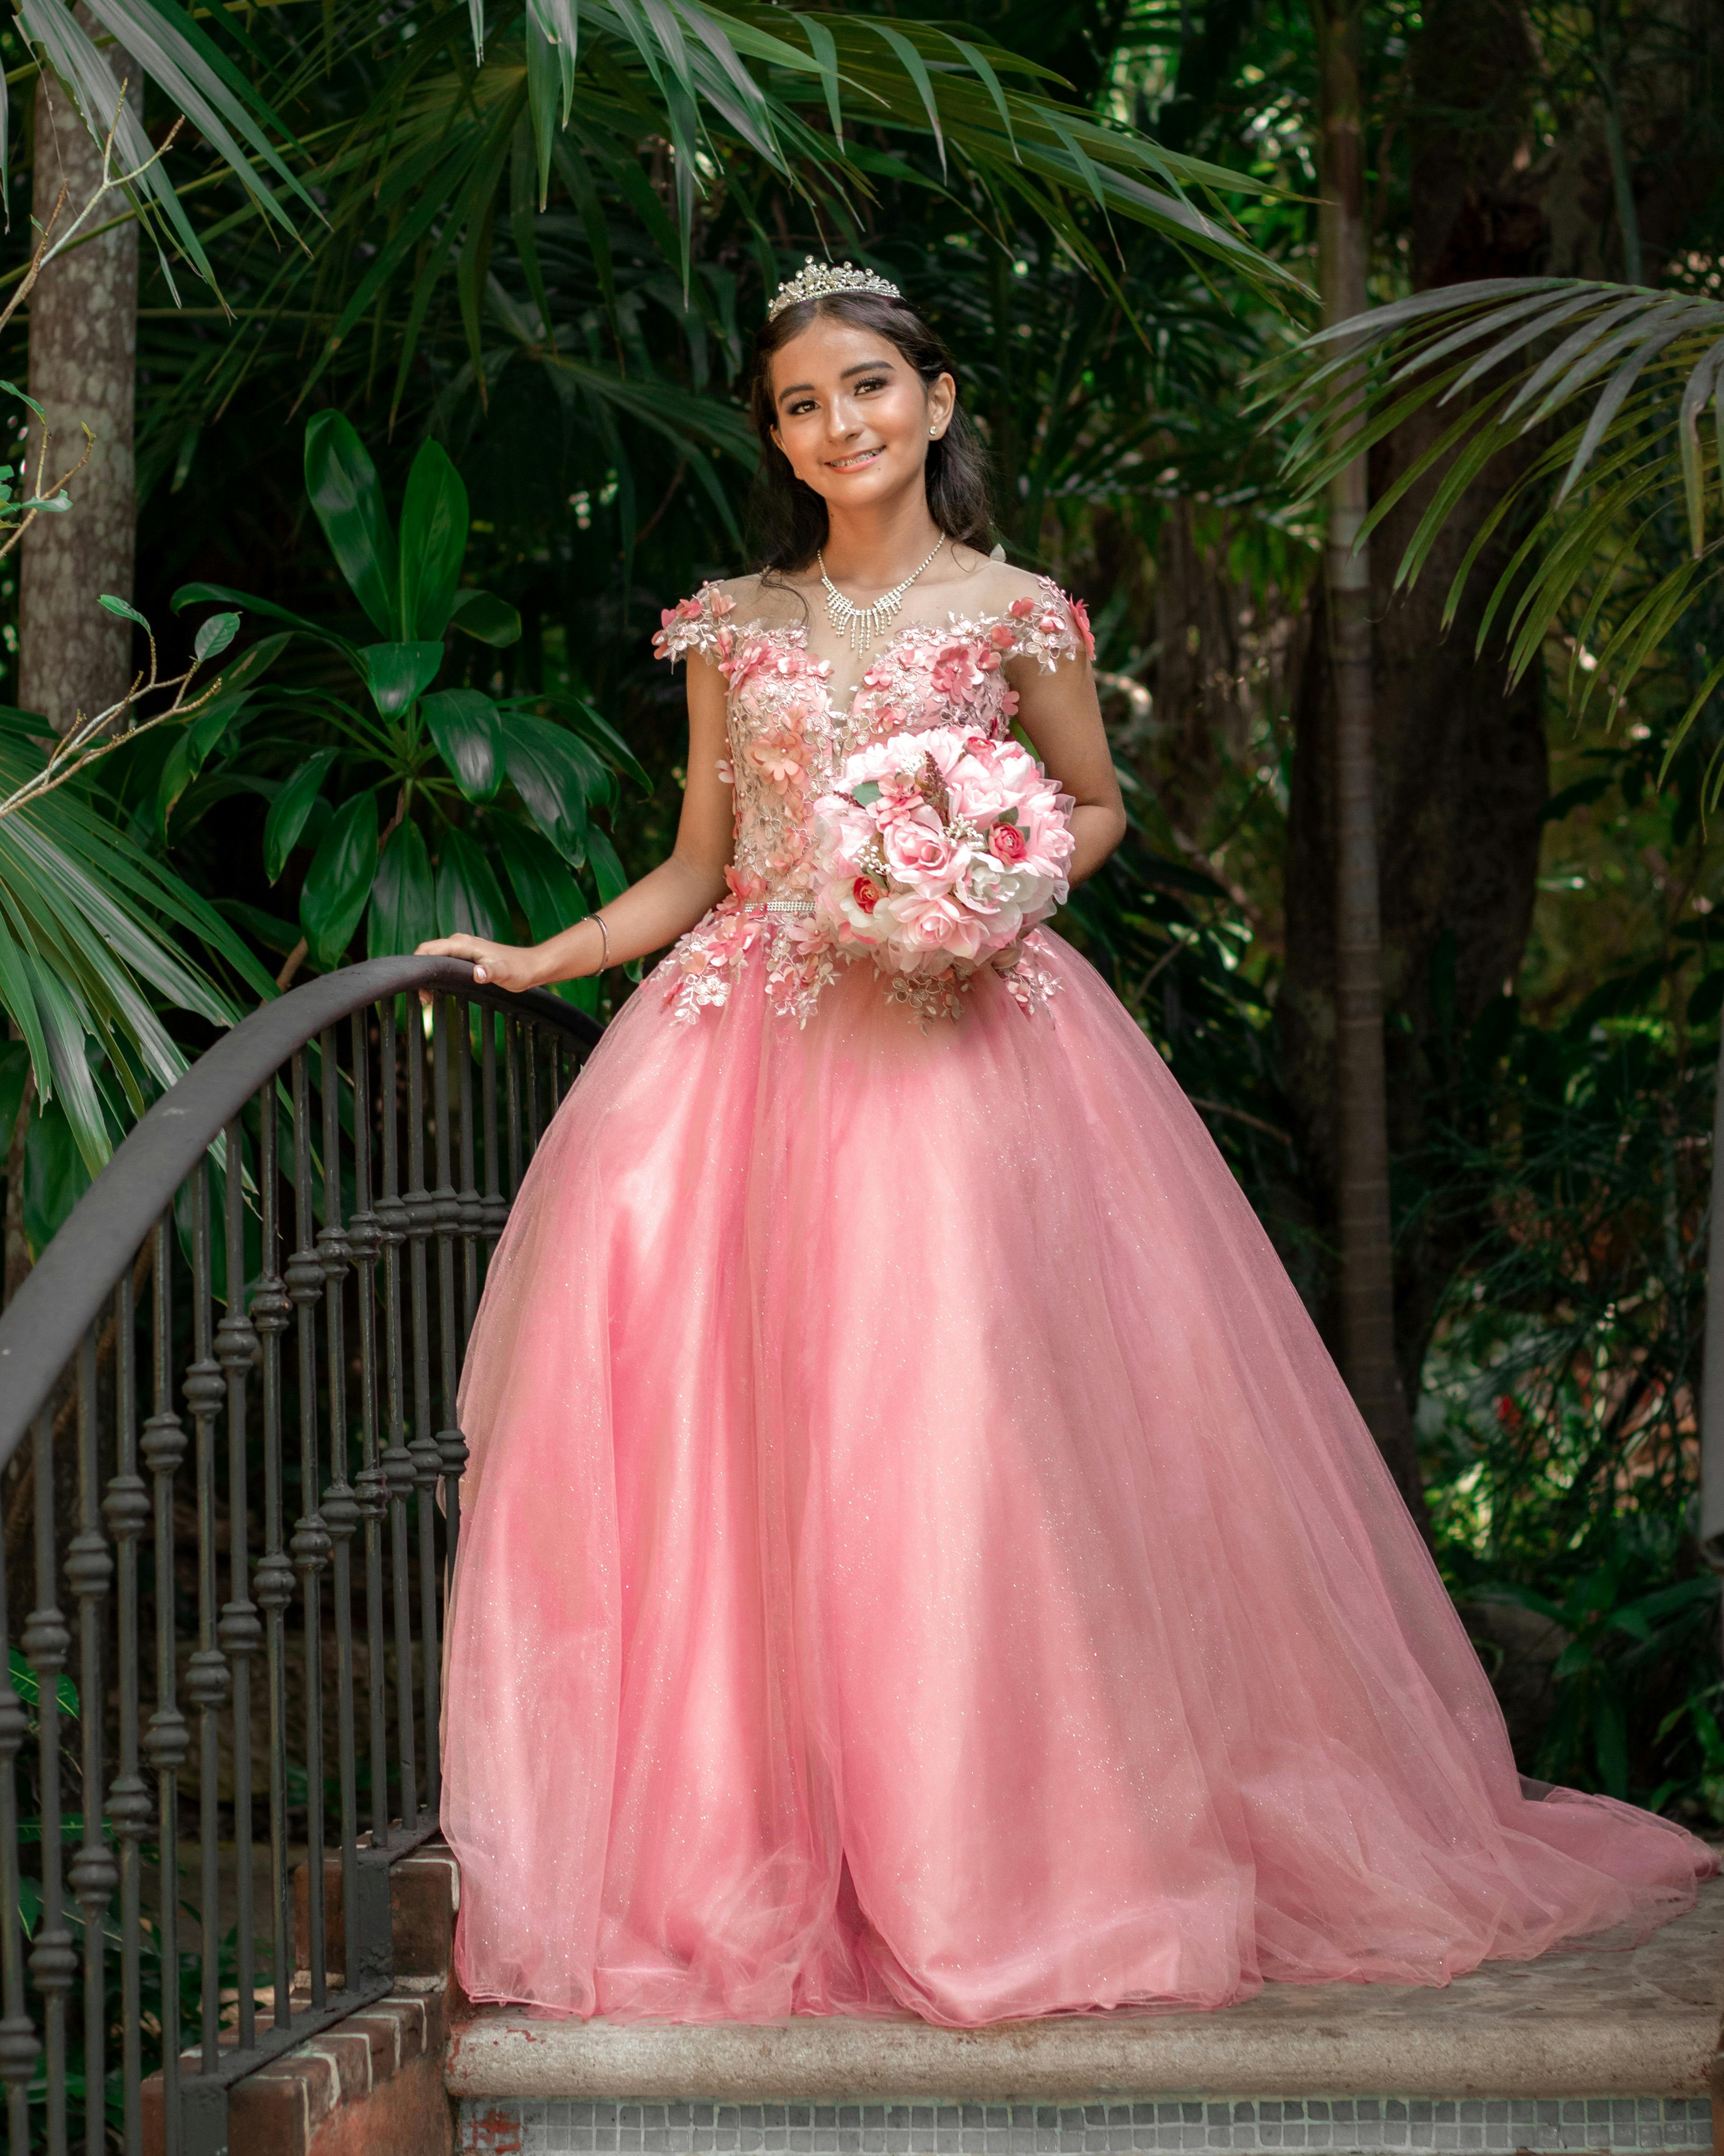 DRESS OF THE DAY – PEACH BALL GOWN – WEDDING STYLE ADVISOR